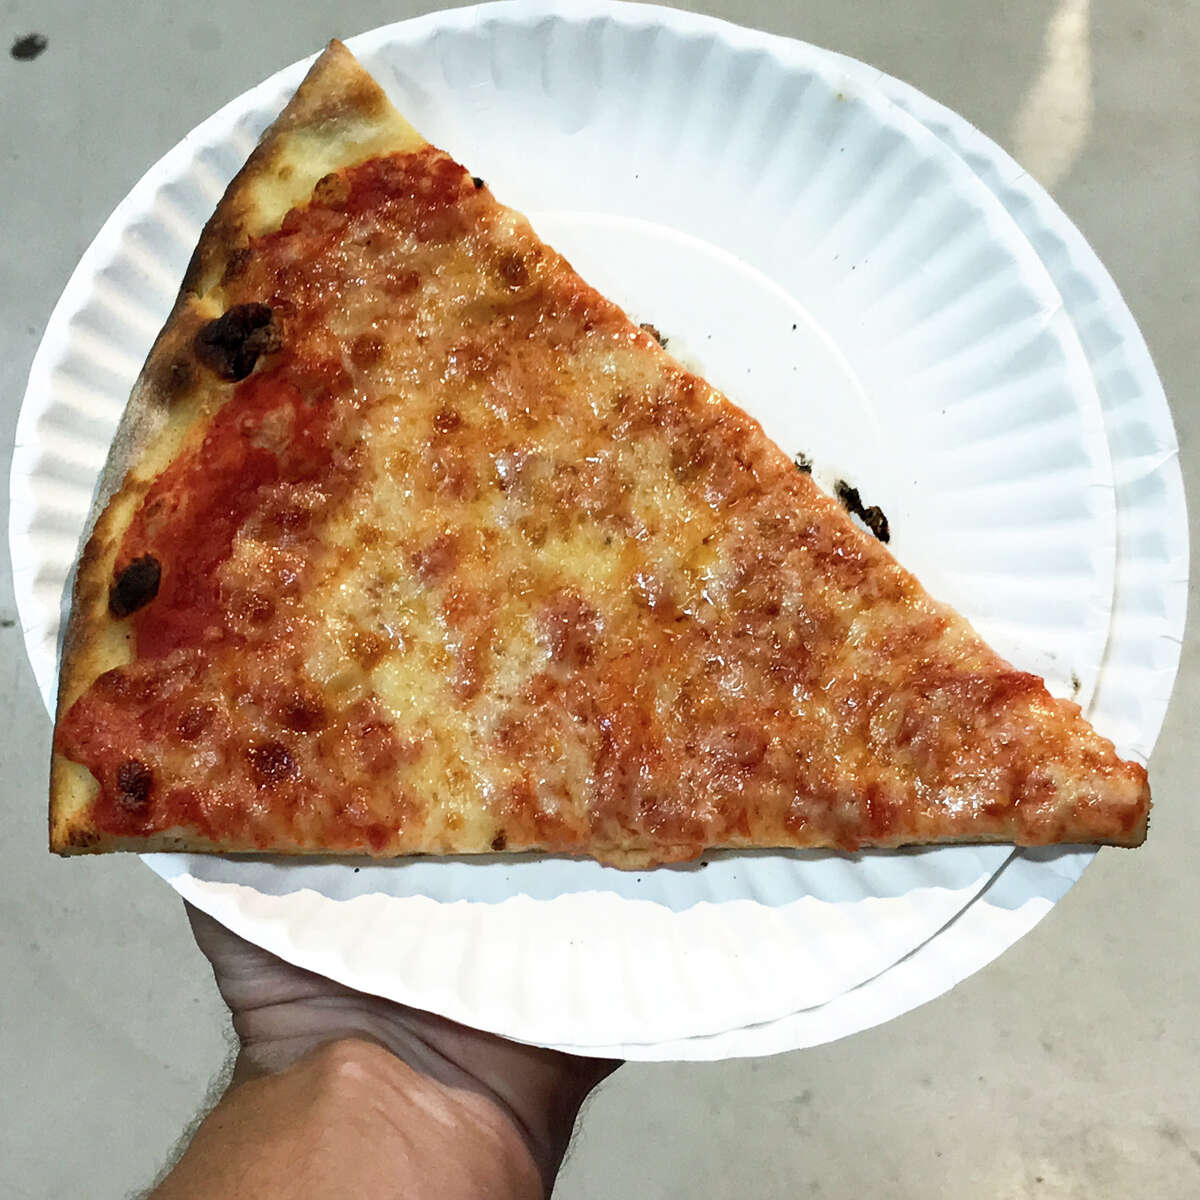 A slice of New Haven-style pizza from Randy's Wooster Street Pizza can be purchased in the Connecticut Building at The Big E in West Springfield, Massachusetts.